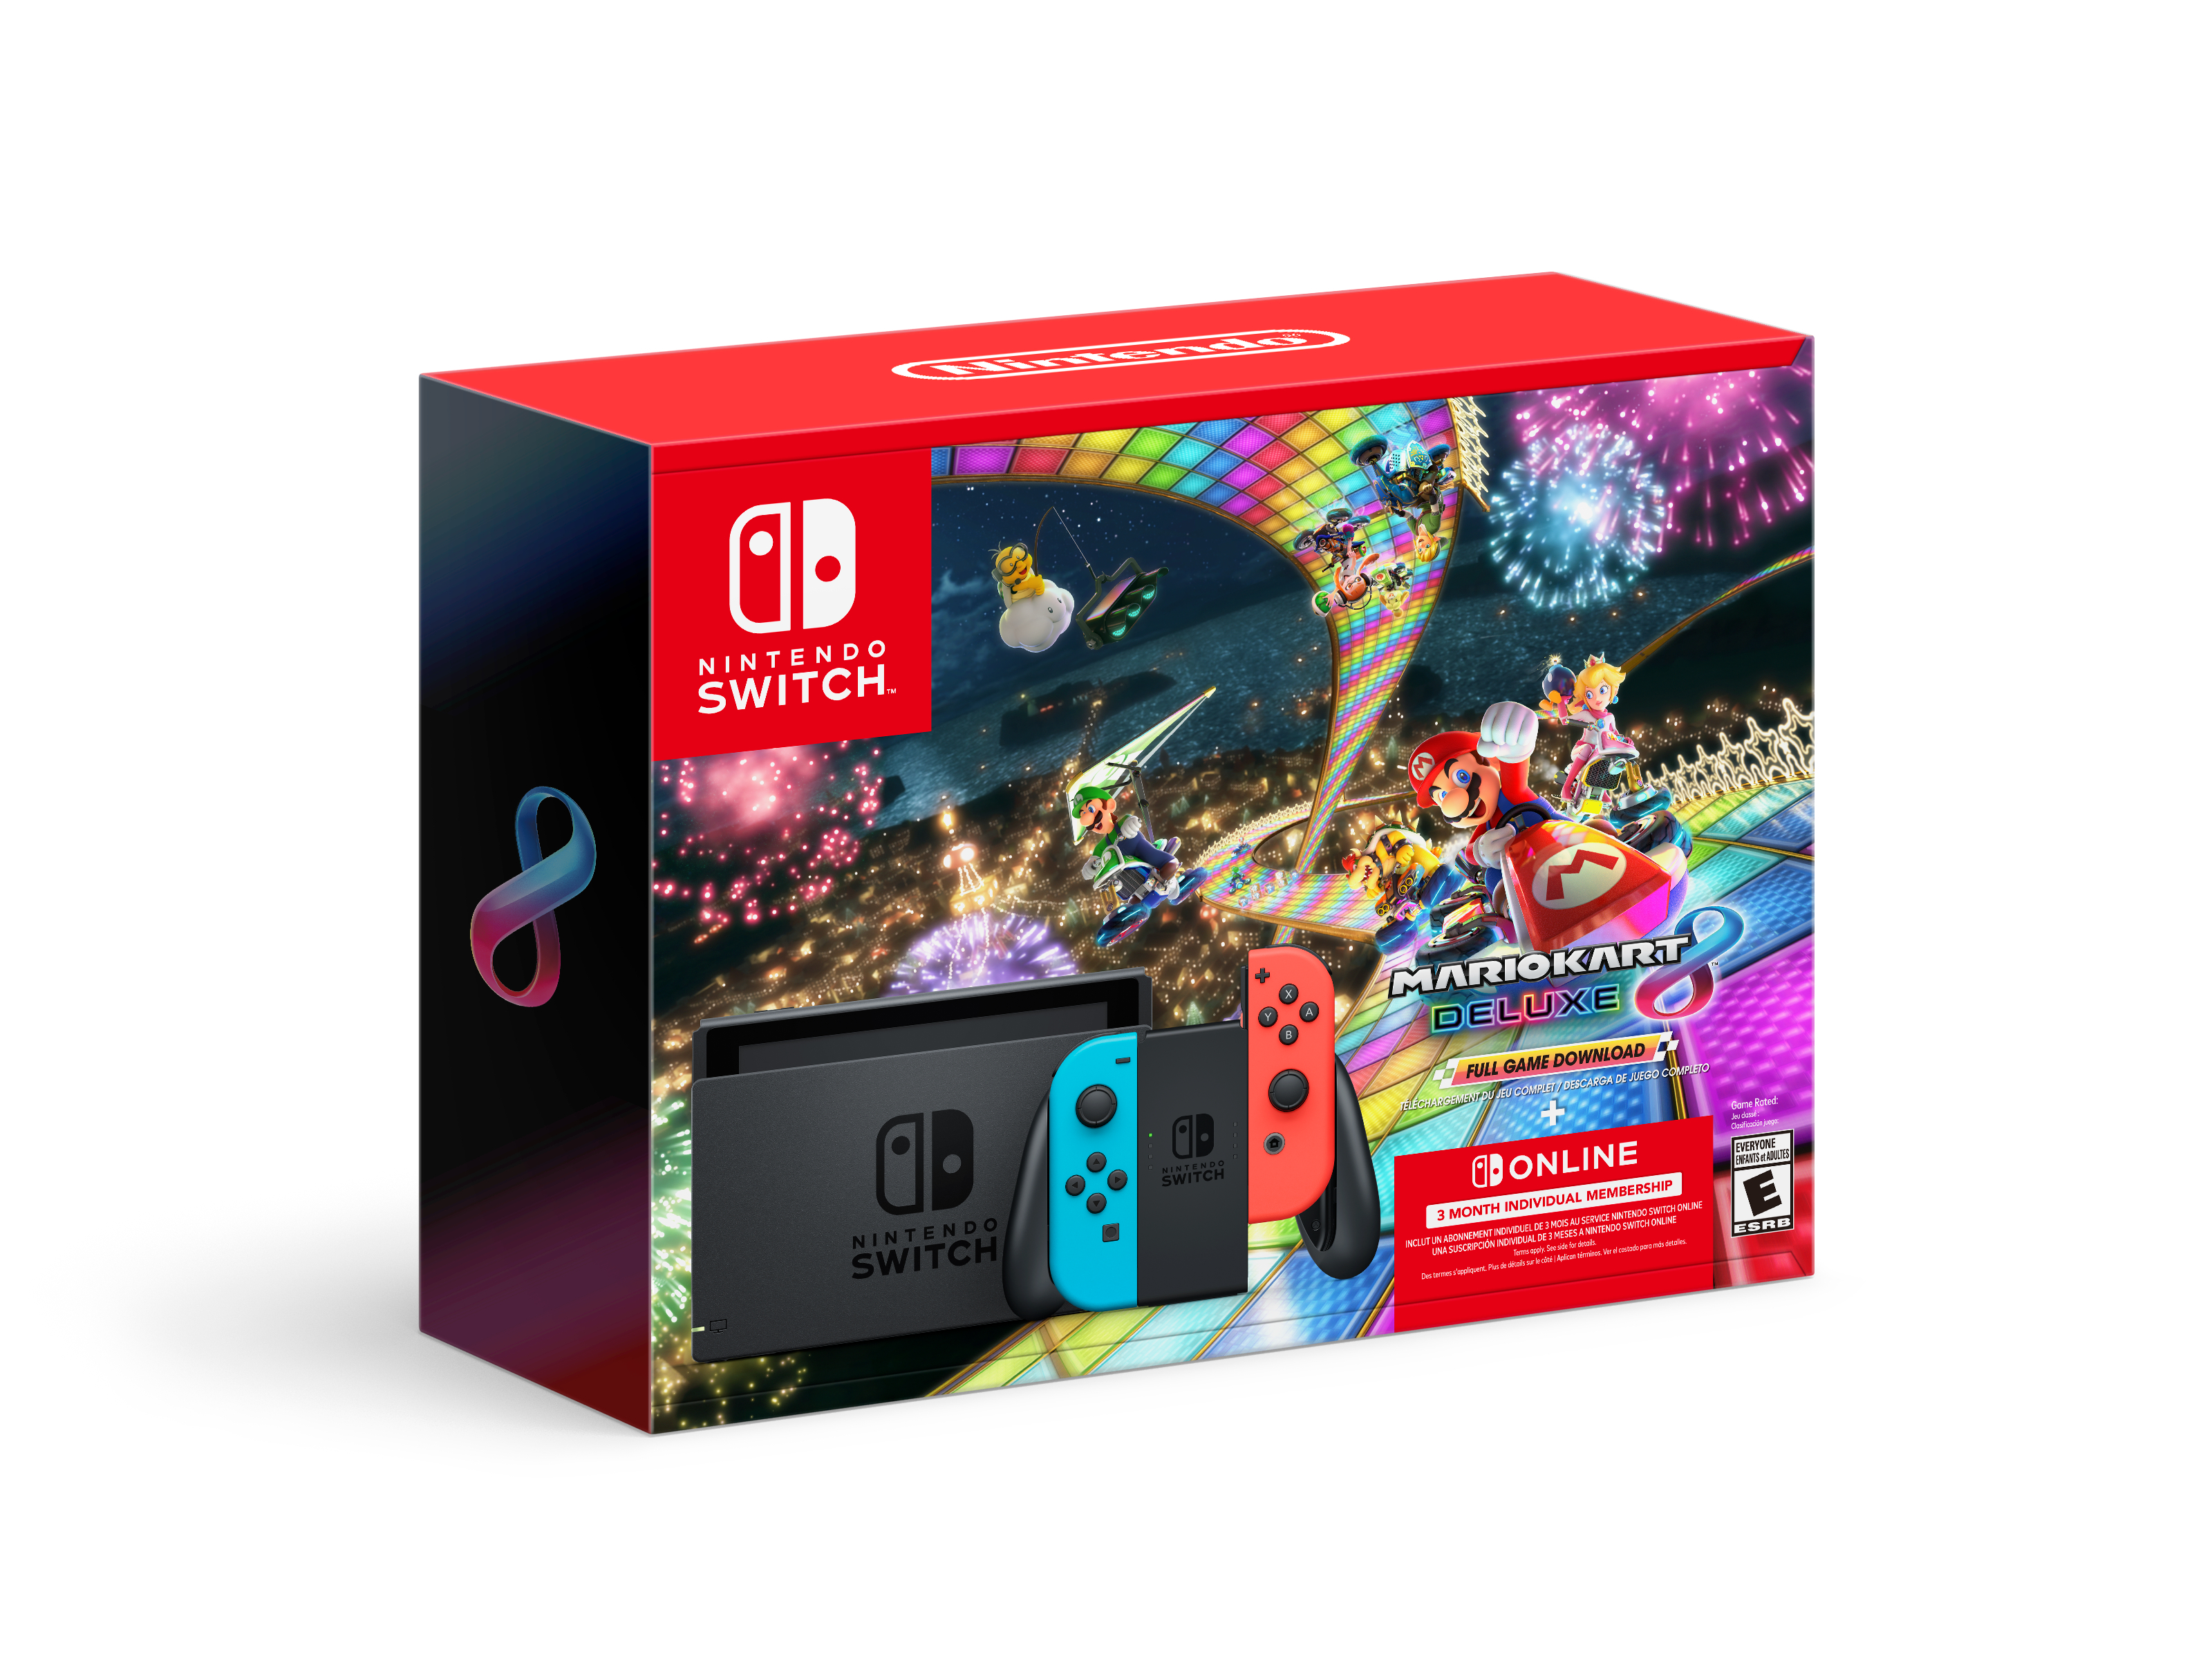 Nintendo Switch Bundle and Game Deals Light up a Festive Range of Black  Friday Offers From Nintendo | Business Wire